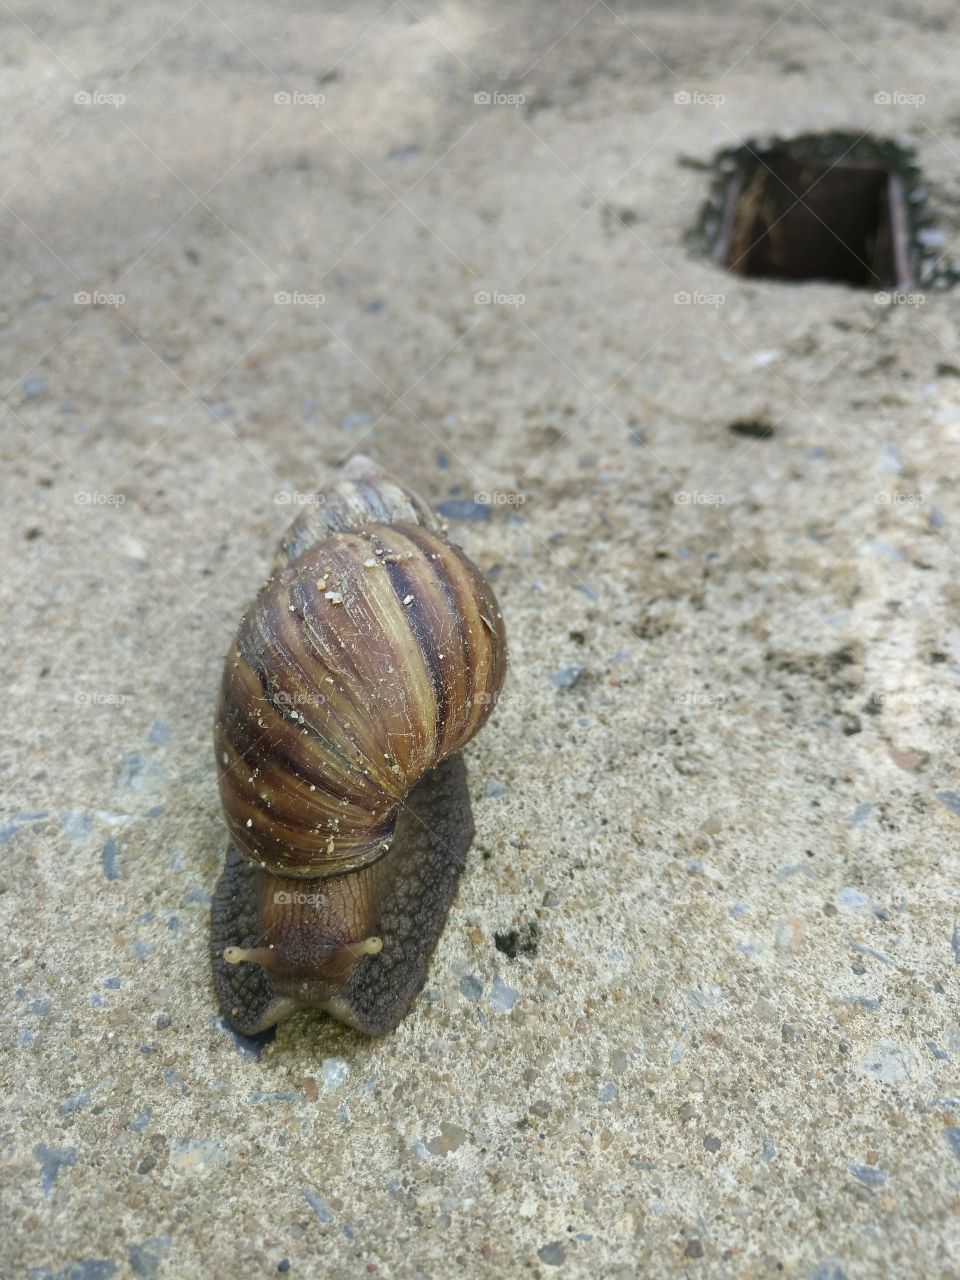 One brown snail walking on the floor during the way.